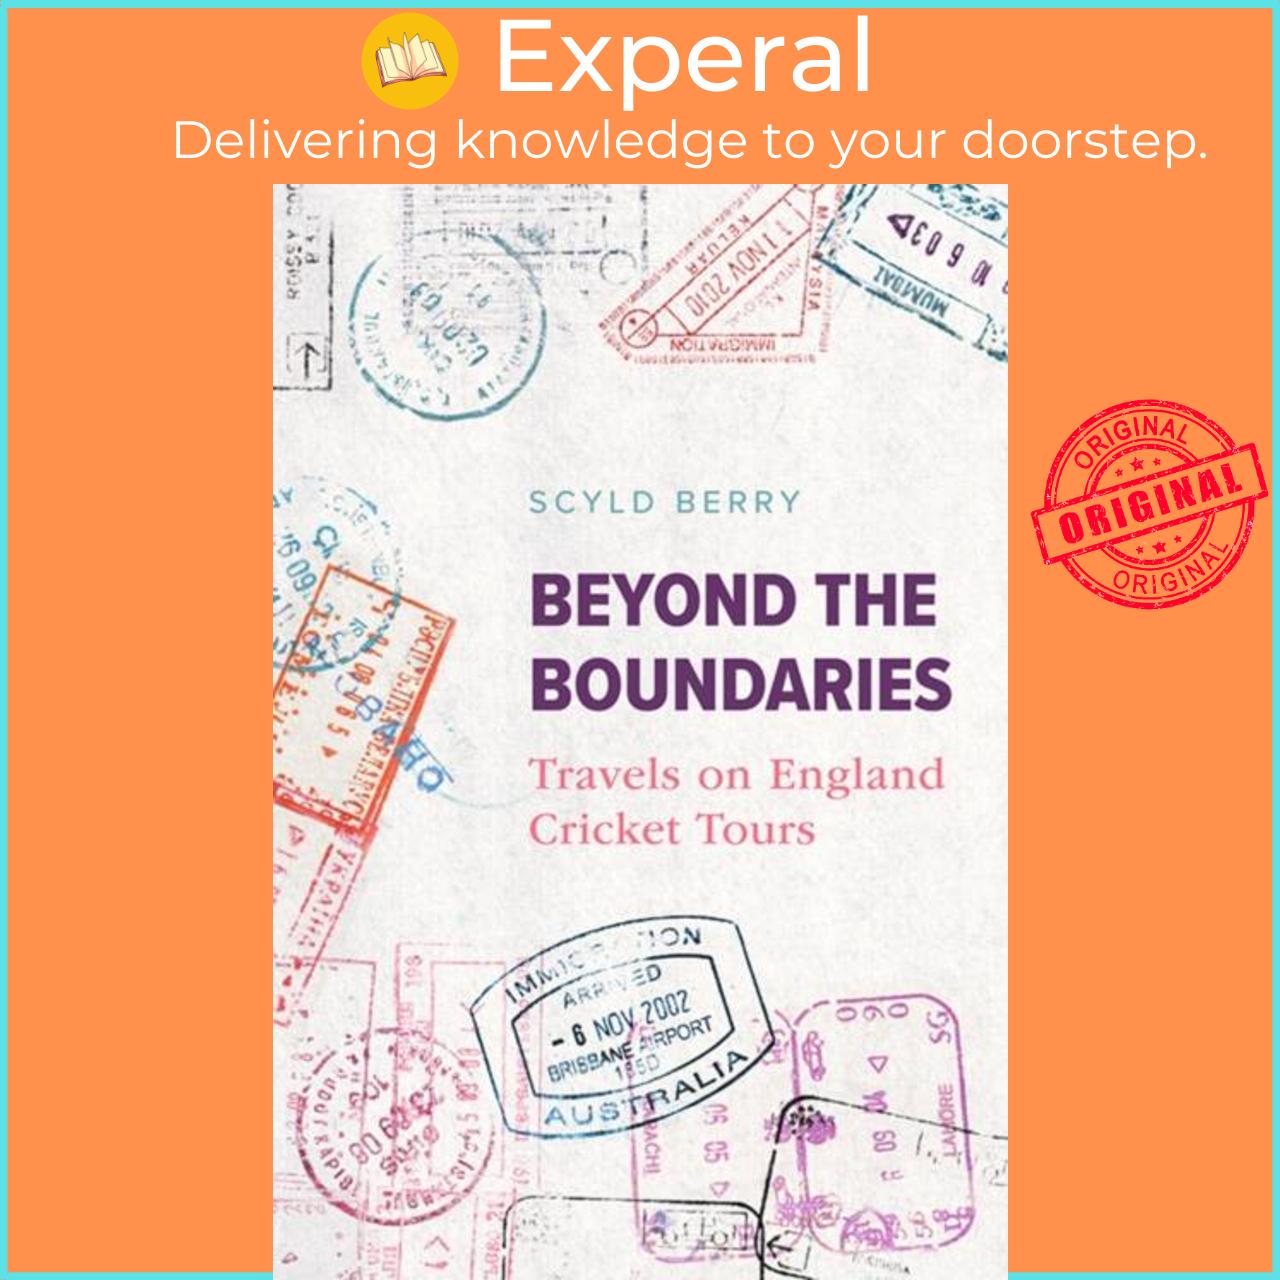 Sách - Beyond the Boundaries - Travels on England Cricket Tours by Scyld Berry (UK edition, hardcover)